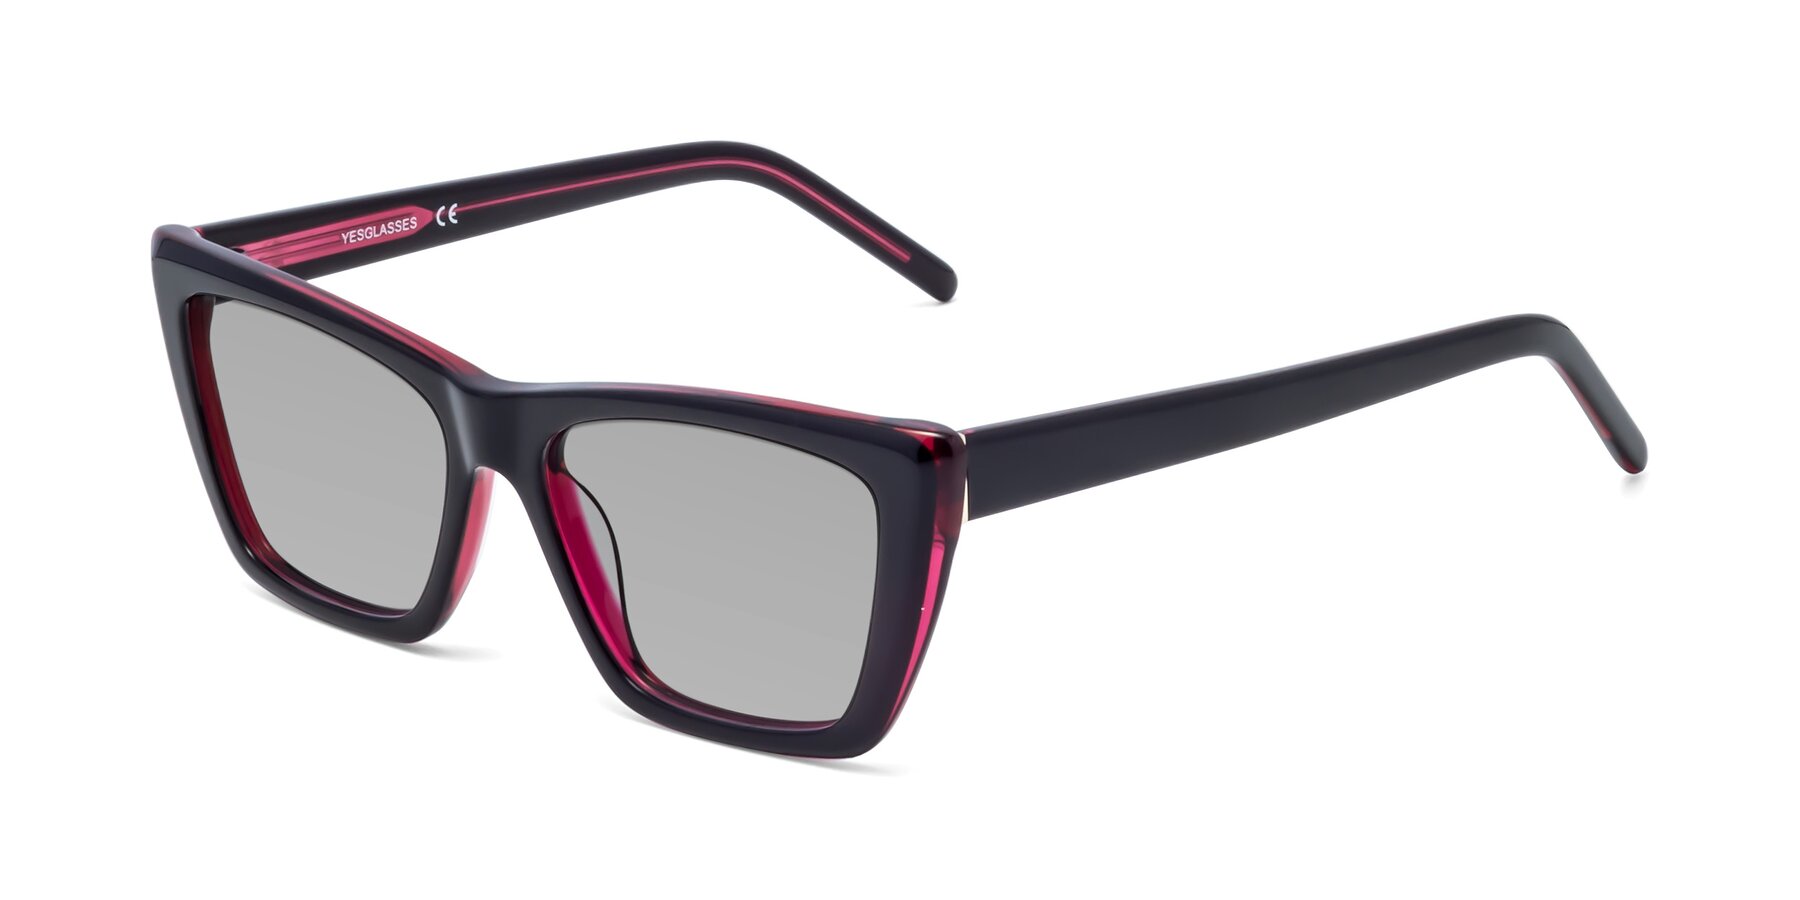 Angle of 1494 in Black-Wine with Light Gray Tinted Lenses